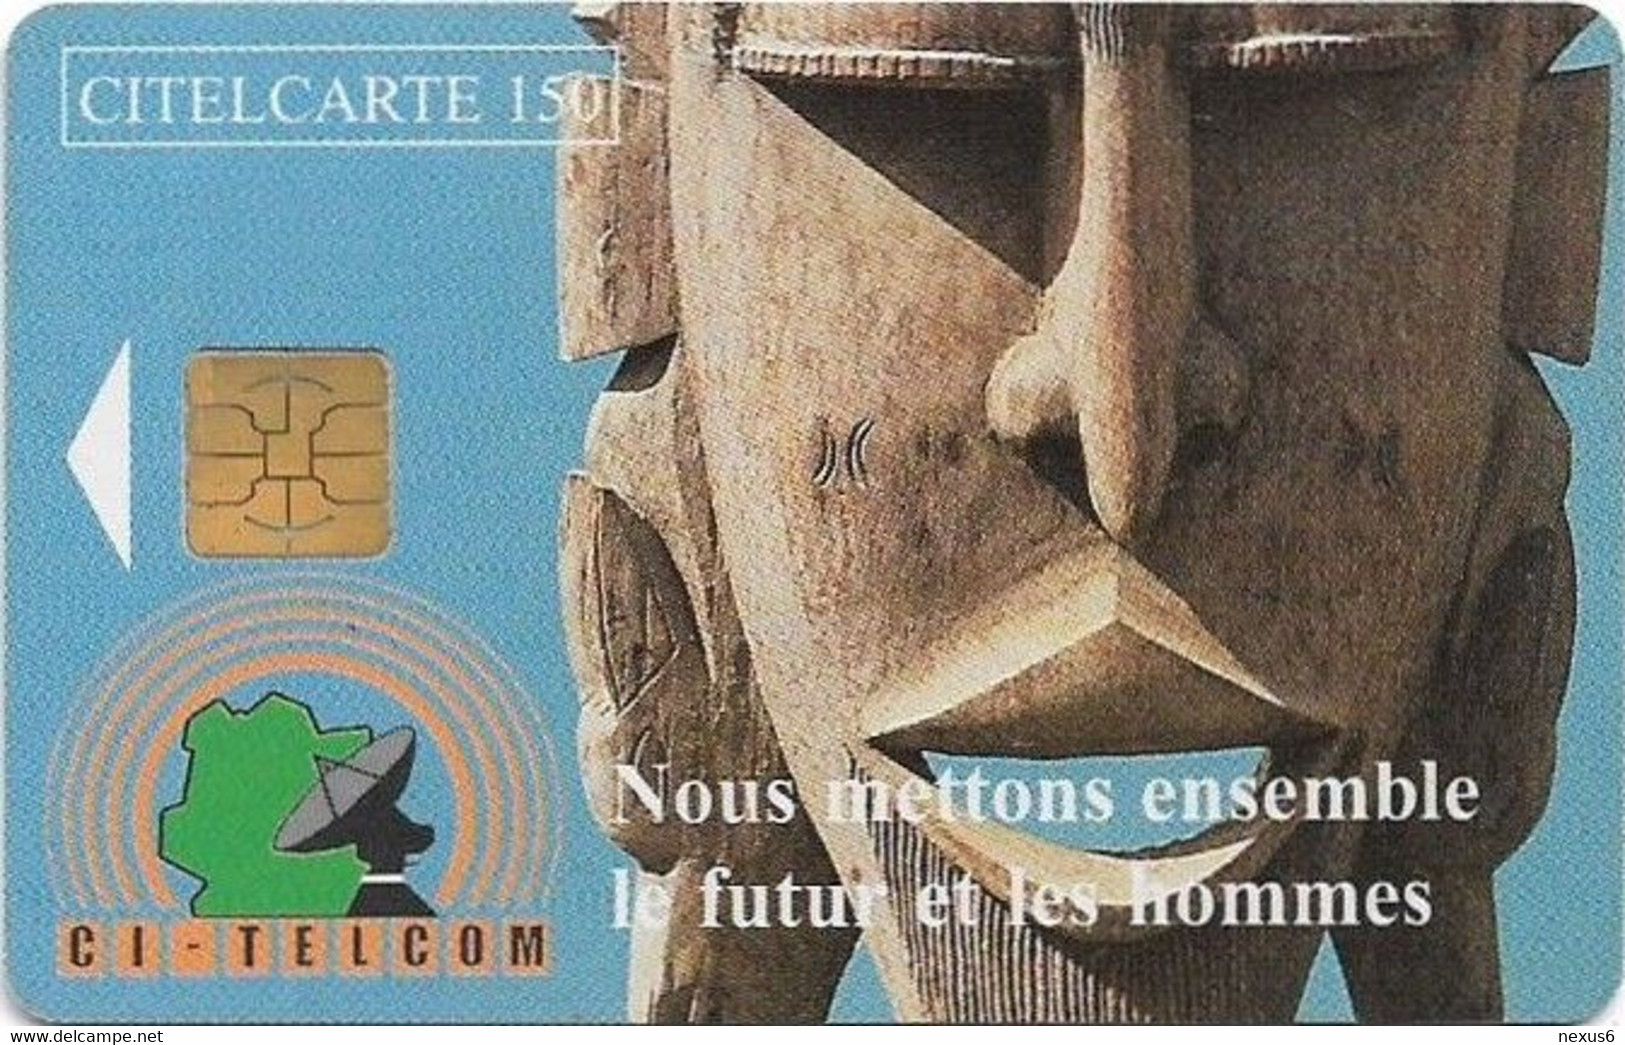 Ivory Coast - CI-Telcom - Carved Mask, Chip Philips, 150Units, 25.500ex, Used - Costa D'Avorio